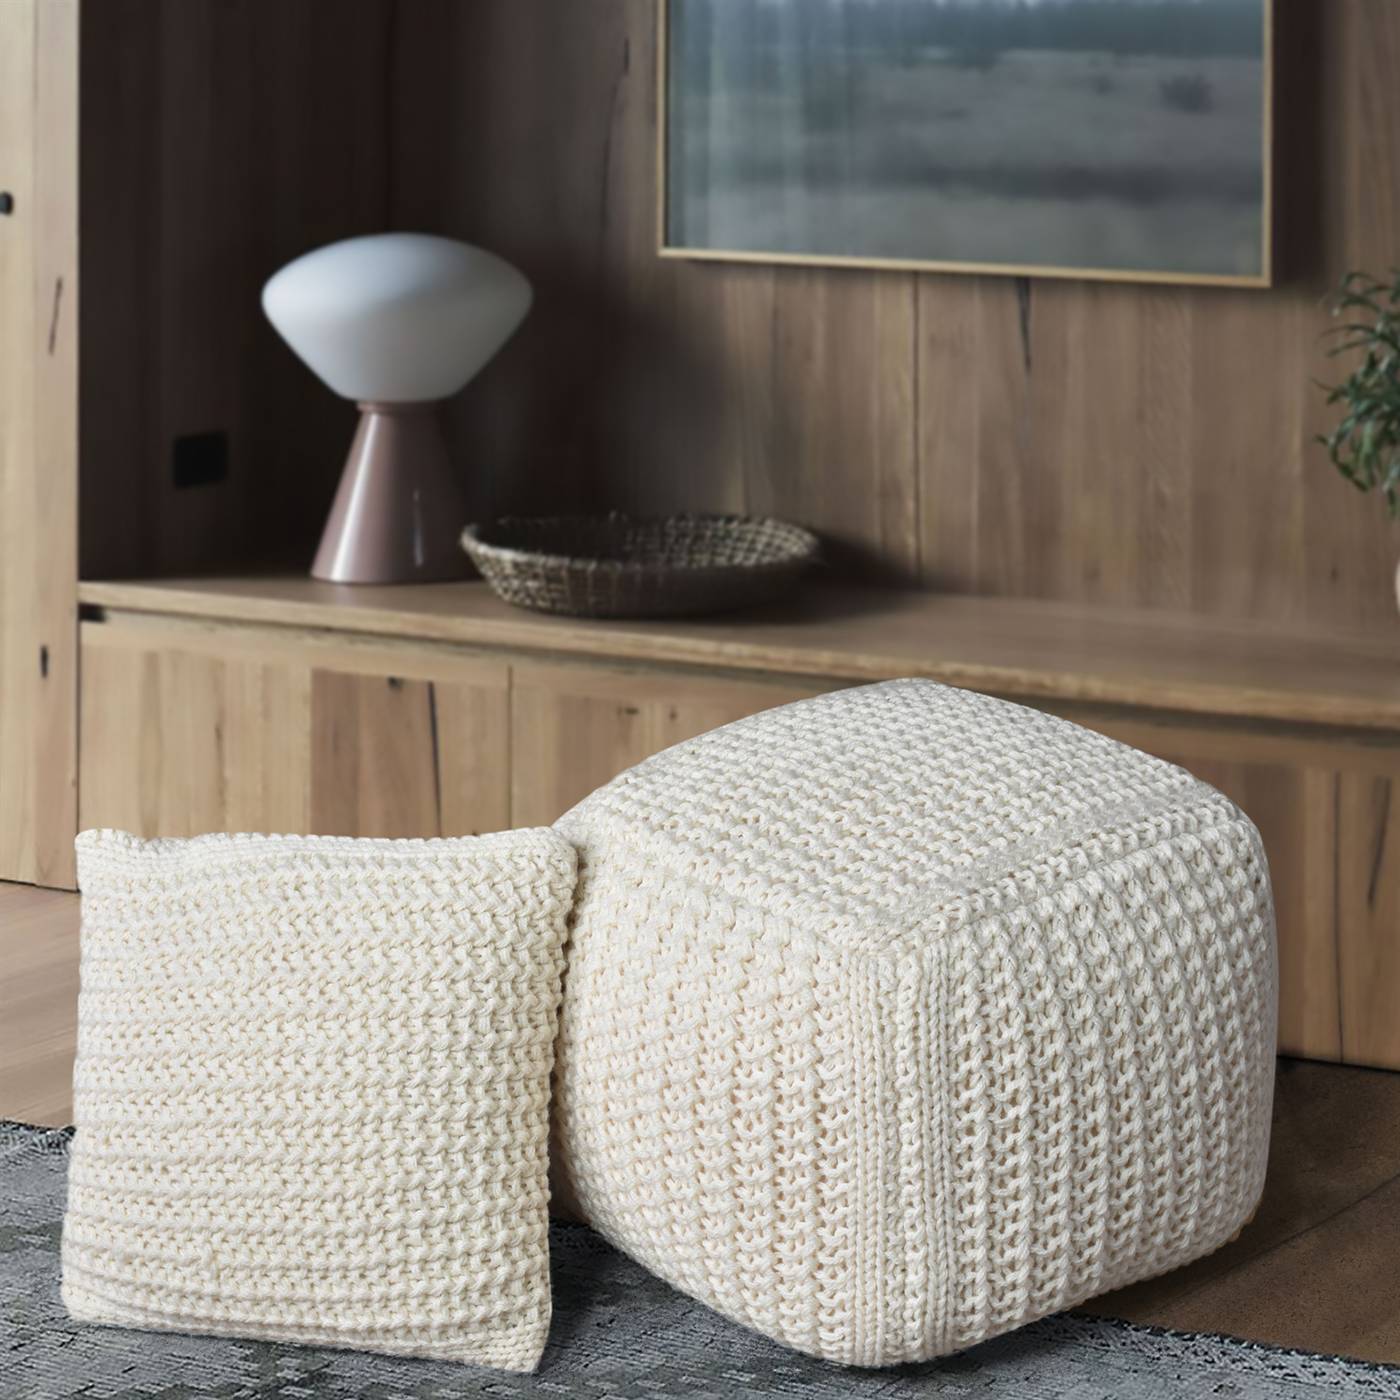 Nottingham Pouf, 40x40x40 cm, Natural White, NZ Wool, Hand Knitted, Hm Knitted, Flat Weave